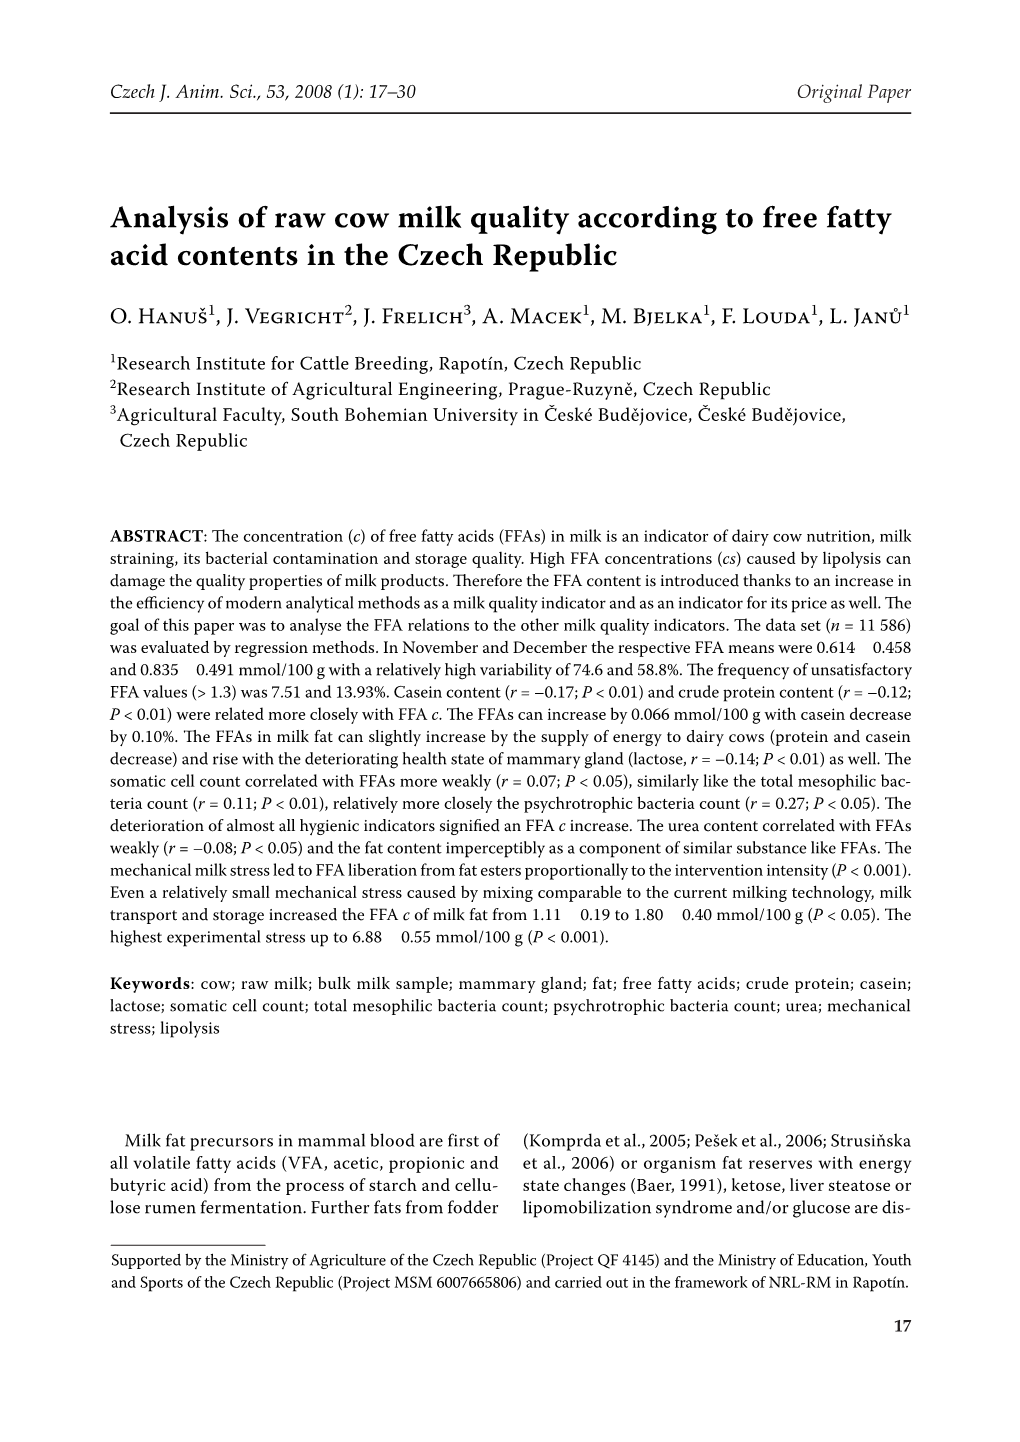 Analysis of Raw Cow Milk Quality According to Free Fatty Acid Contents in the Czech Republic